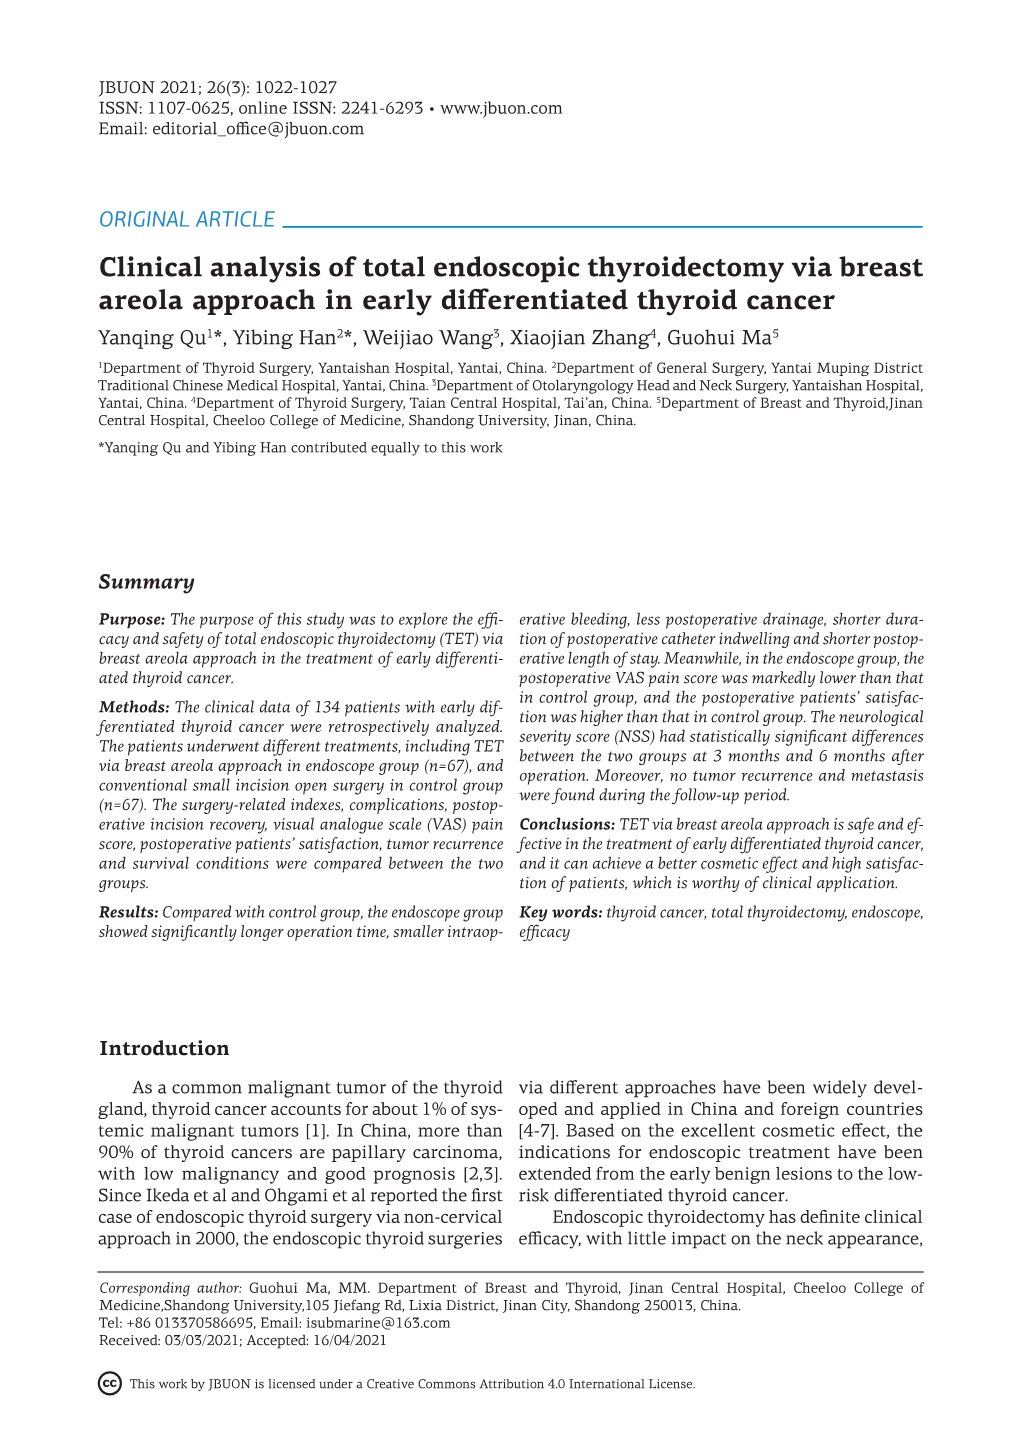 Clinical Analysis of Total Endoscopic Thyroidectomy Via Breast Areola